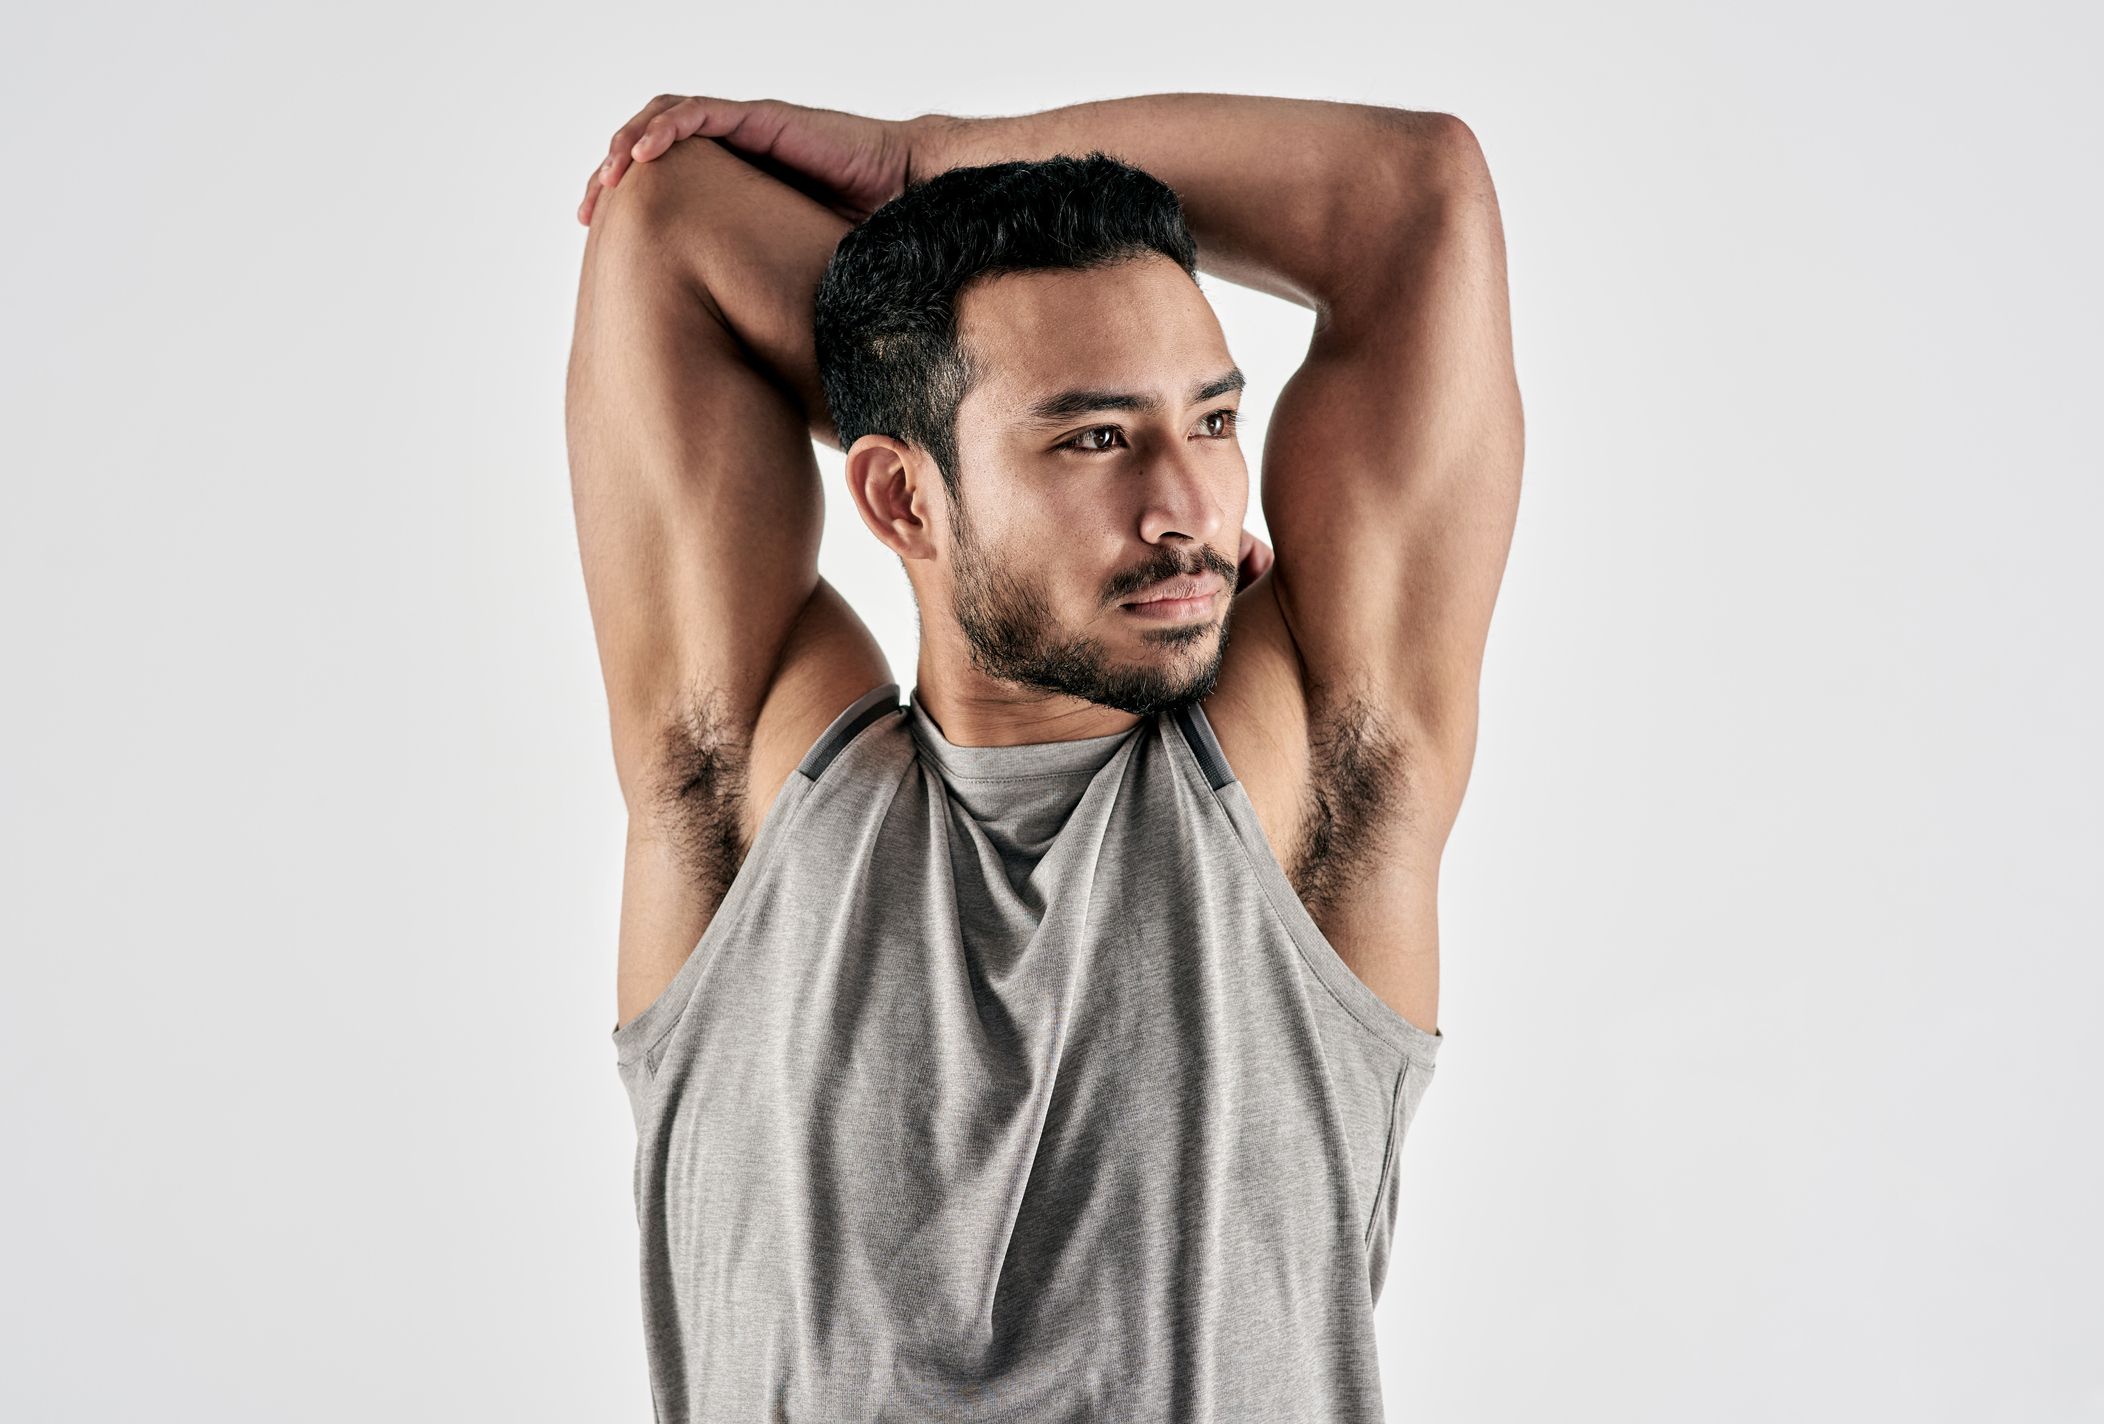 4 Men With an Armpit Fetish (Maschanlagnia) Share Their Sex Lives pic image